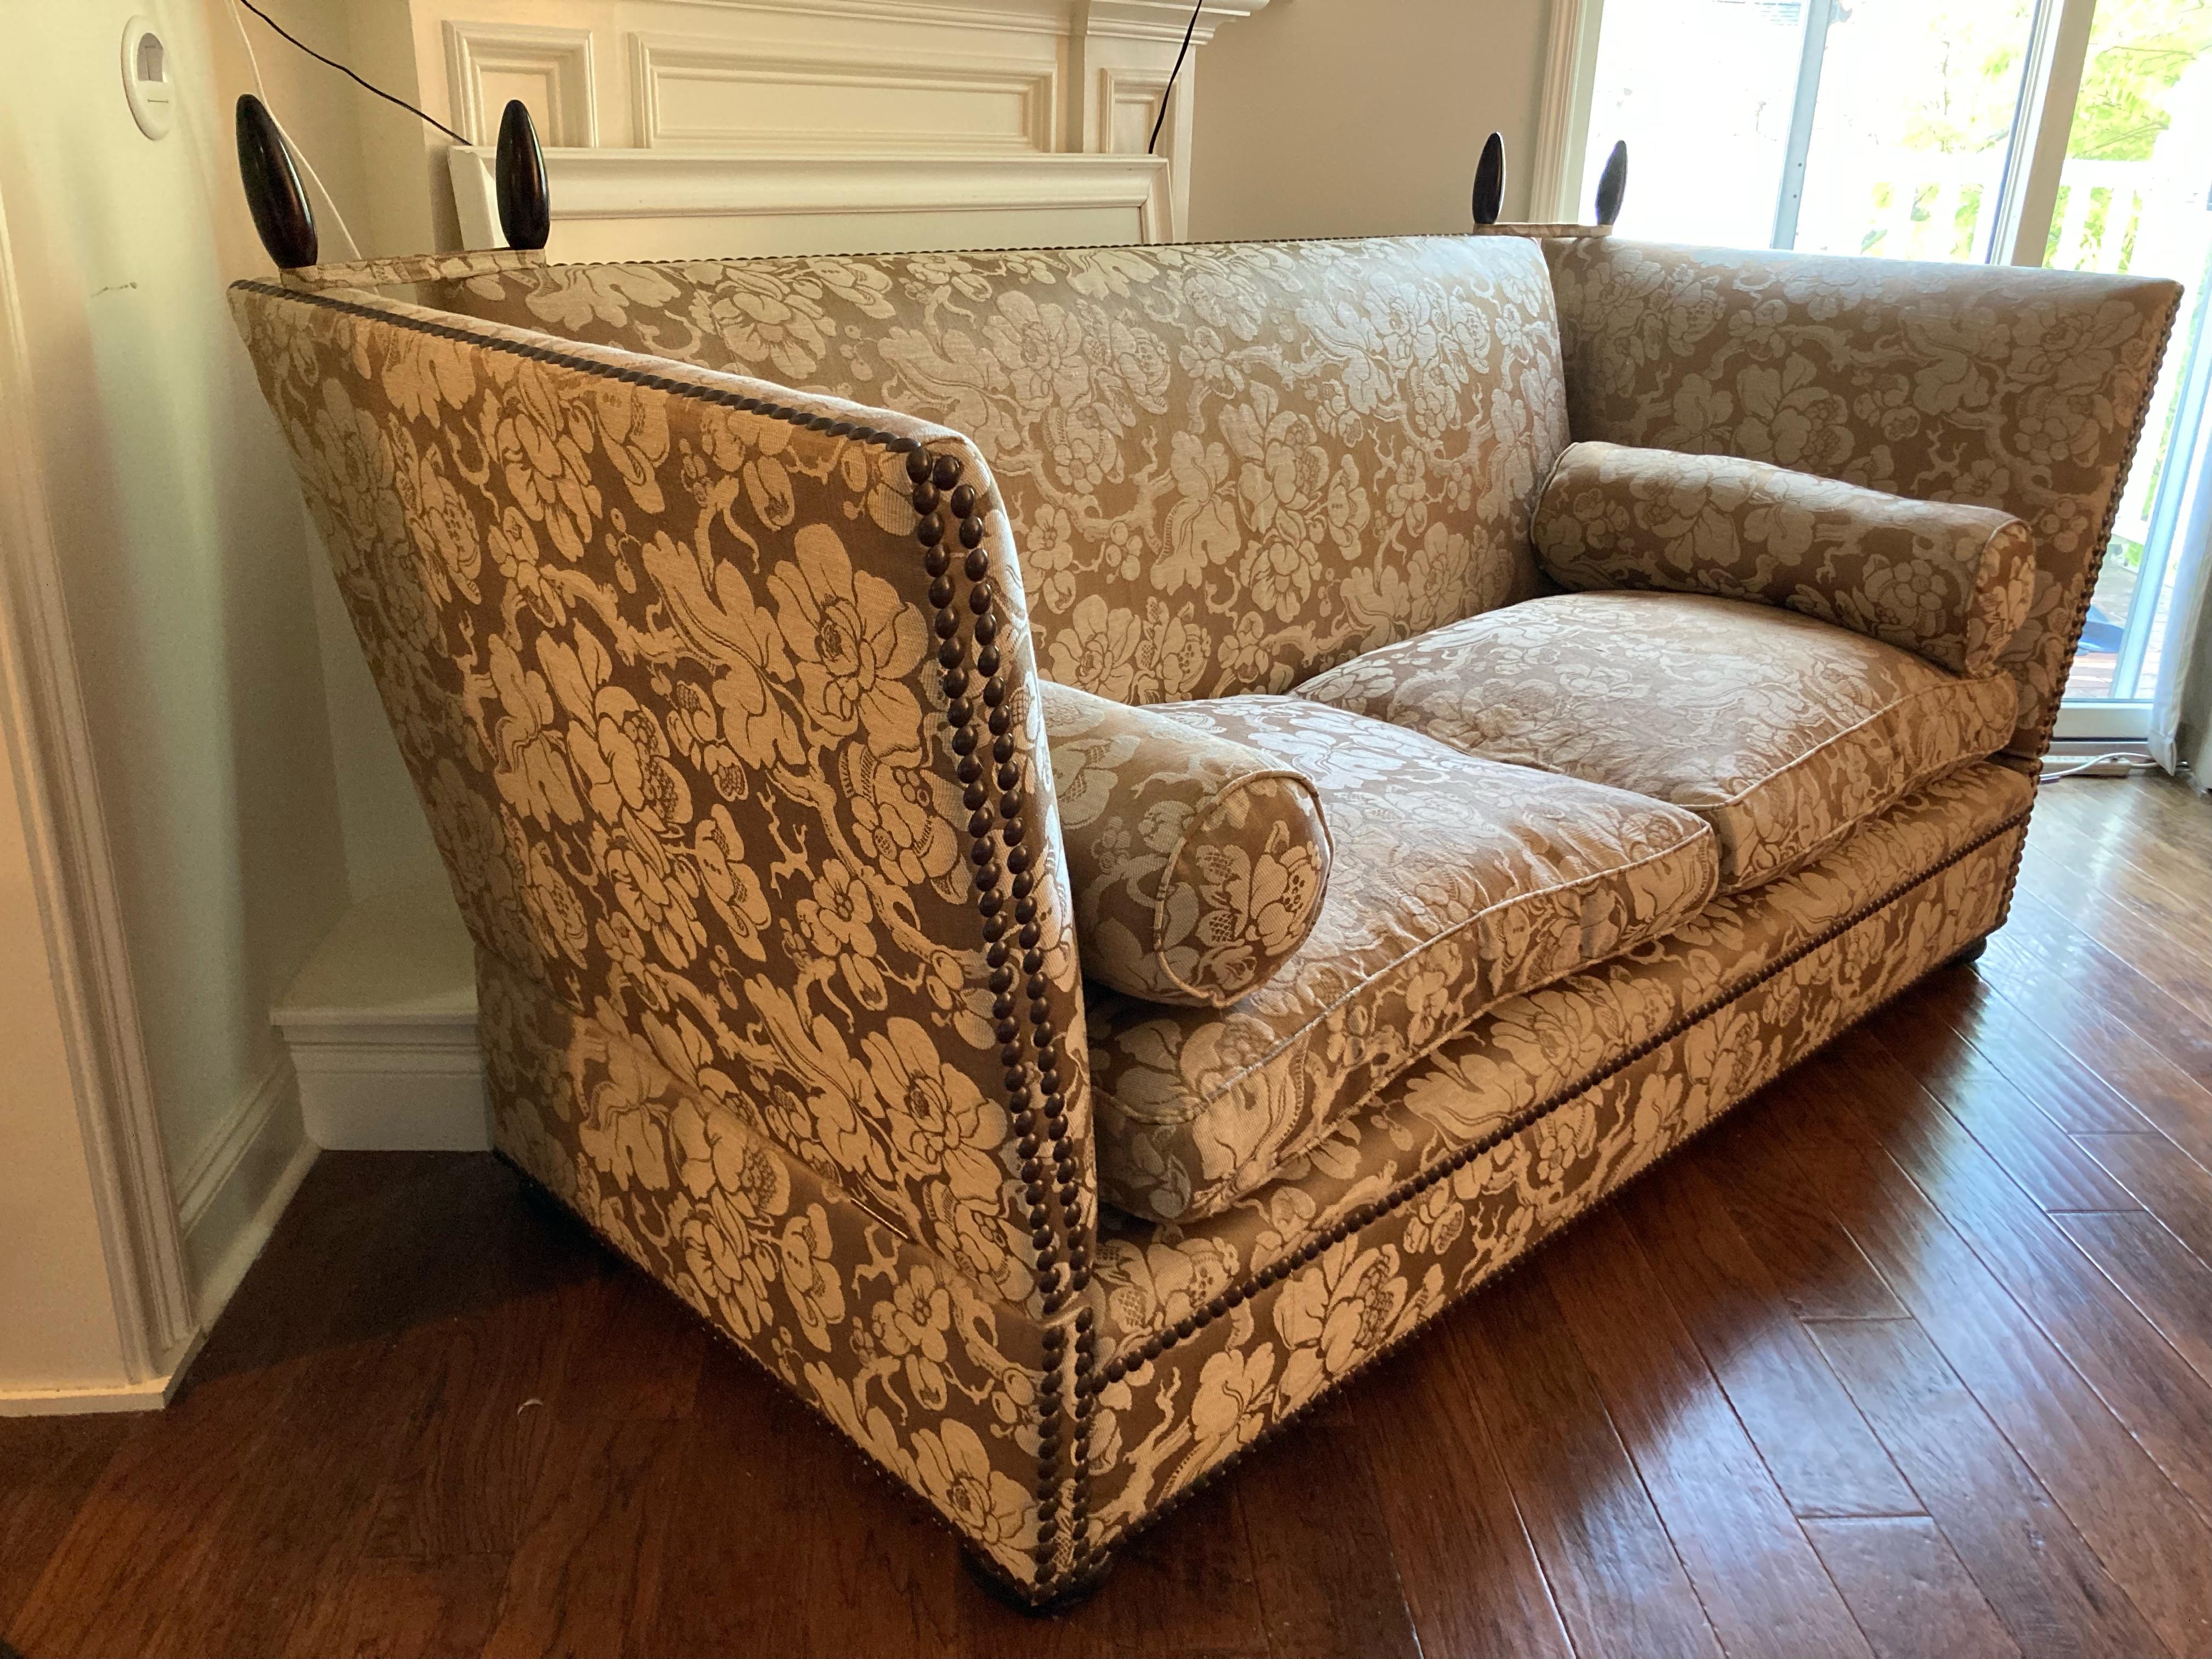 Large sumptuous George Smith custom knole style sofa with collapsible sides, mahogany finials, and down filled seat cushion. Japonais sable fabric shows wear  on seat cushions so customer may opt to reupholster seat covers.  
With sides extended